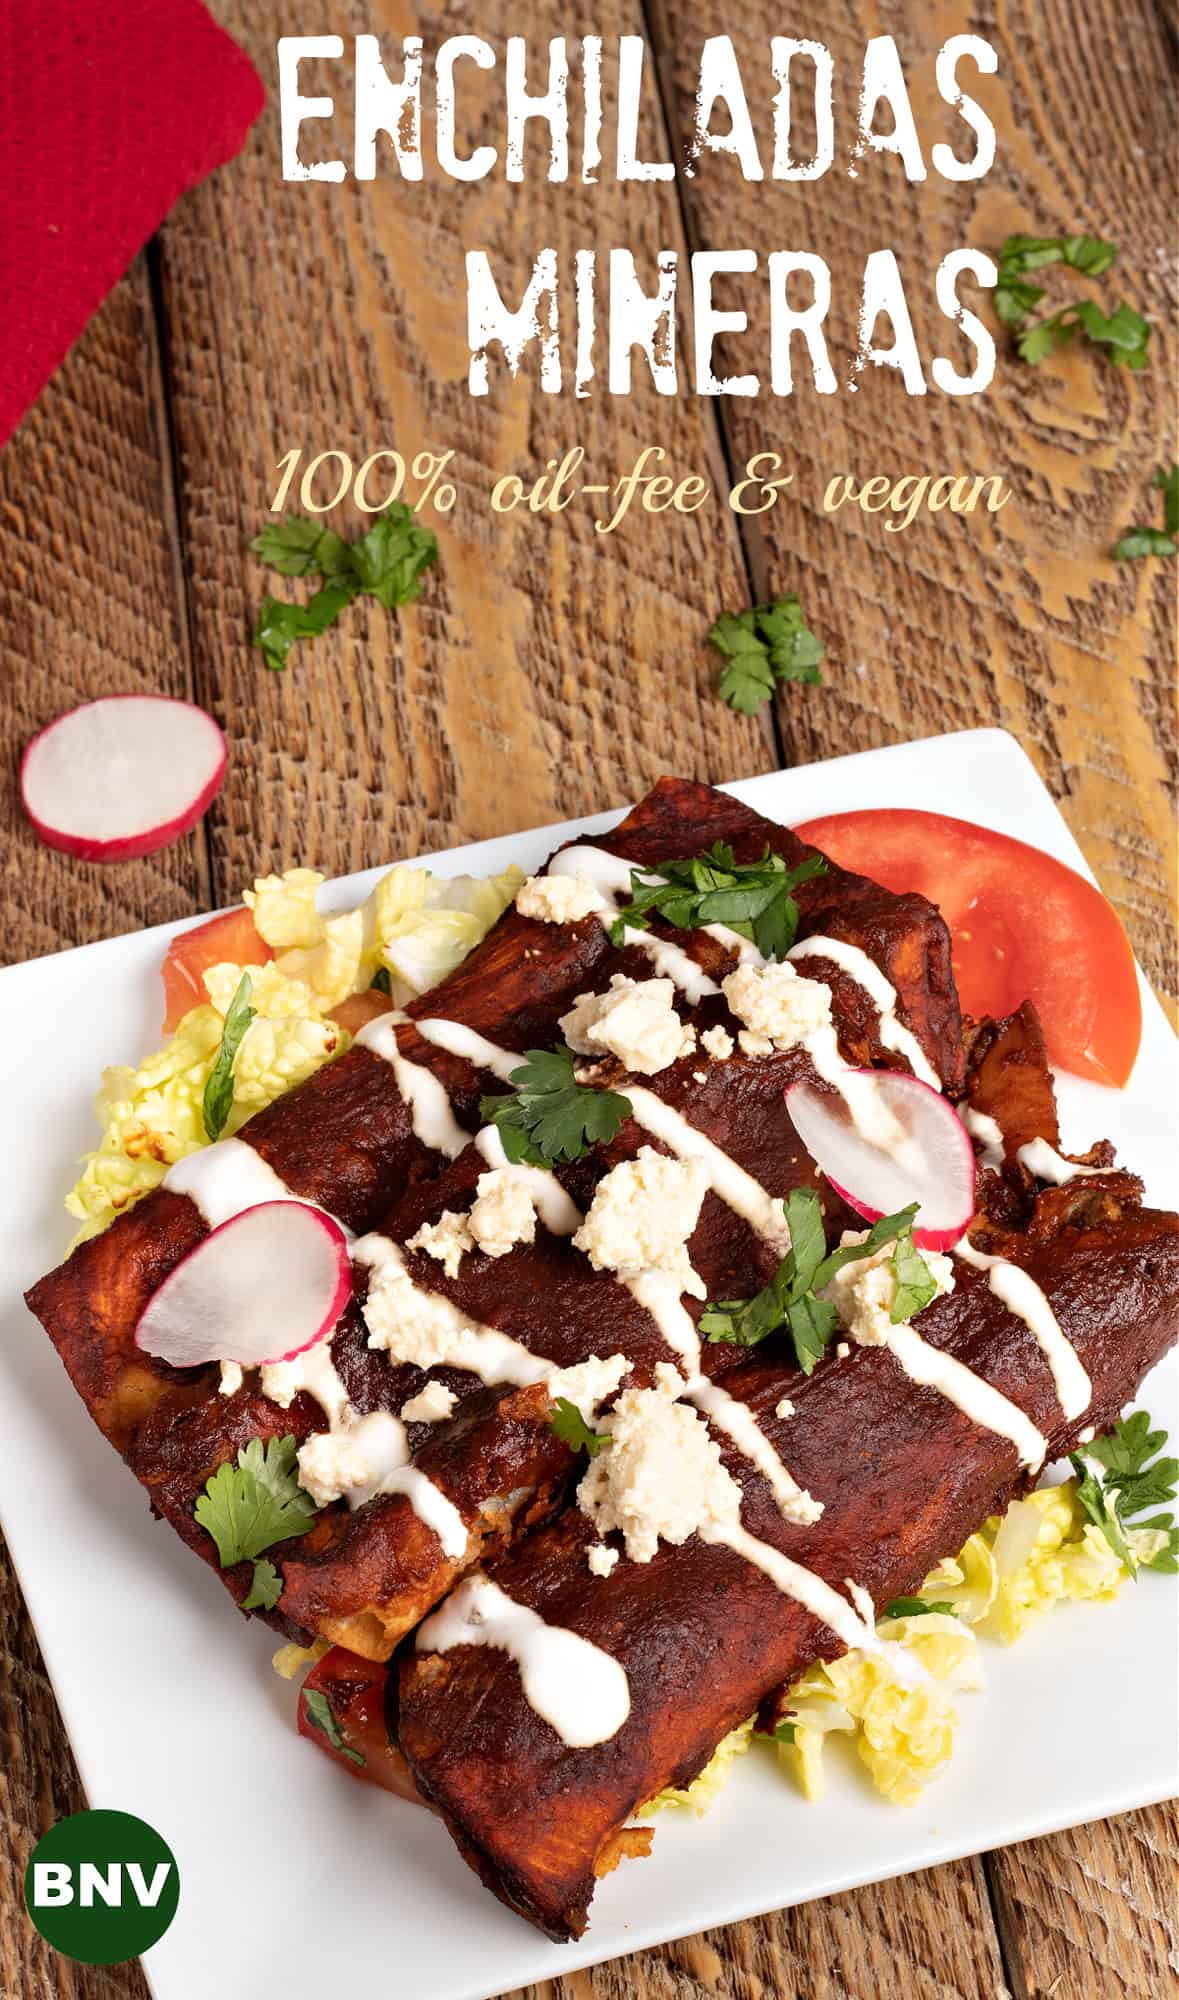 pinterest photo of 3 vegan enchiladas mineral sitting on a bed of cabbage slaw with the words ENCHILADAS MINERAS 100% oil-free & vegan